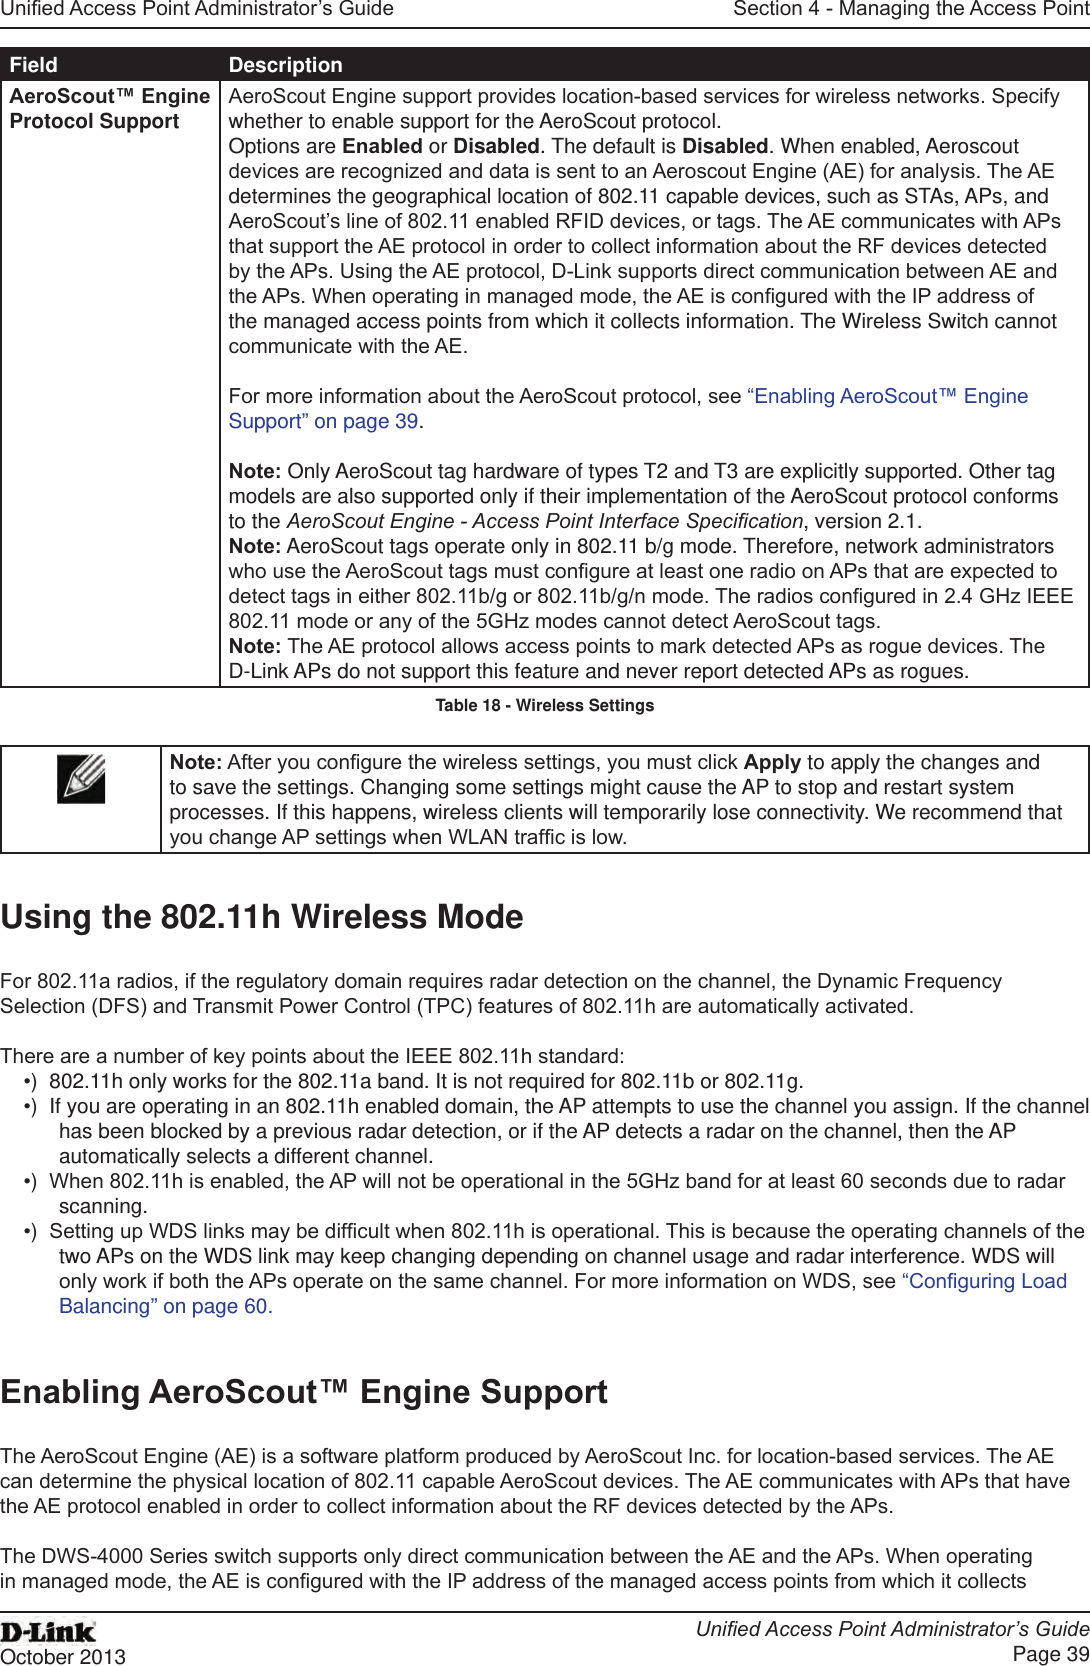 Unied Access Point Administrator’s GuideUnied Access Point Administrator’s GuidePage 39October 2013Section 4 - Managing the Access PointField DescriptionAeroScout™ Engine Protocol Support AeroScout Engine support provides location-based services for wireless networks. Specify whether to enable support for the AeroScout protocol. Options are Enabled or Disabled. The default is Disabled. When enabled, Aeroscout devices are recognized and data is sent to an Aeroscout Engine (AE) for analysis. The AE determines the geographical location of 802.11 capable devices, such as STAs, APs, and AeroScout’s line of 802.11 enabled RFID devices, or tags. The AE communicates with APs that support the AE protocol in order to collect information about the RF devices detected by the APs. Using the AE protocol, D-Link supports direct communication between AE and the APs. When operating in managed mode, the AE is congured with the IP address of the managed access points from which it collects information. The Wireless Switch cannot communicate with the AE.For more information about the AeroScout protocol, see “Enabling AeroScout™ Engine Support” on page 39.Note: Only AeroScout tag hardware of types T2 and T3 are explicitly supported. Other tag models are also supported only if their implementation of the AeroScout protocol conforms to the AeroScout Engine - Access Point Interface Specication, version 2.1.Note: AeroScout tags operate only in 802.11 b/g mode. Therefore, network administrators who use the AeroScout tags must congure at least one radio on APs that are expected to detect tags in either 802.11b/g or 802.11b/g/n mode. The radios congured in 2.4 GHz IEEE 802.11 mode or any of the 5GHz modes cannot detect AeroScout tags.Note: The AE protocol allows access points to mark detected APs as rogue devices. The D-Link APs do not support this feature and never report detected APs as rogues.Table 18 - Wireless SettingsNote: After you congure the wireless settings, you must click Apply to apply the changes and to save the settings. Changing some settings might cause the AP to stop and restart system processes. If this happens, wireless clients will temporarily lose connectivity. We recommend that you change AP settings when WLAN trafc is low.Using the 802.11h Wireless ModeFor 802.11a radios, if the regulatory domain requires radar detection on the channel, the Dynamic Frequency Selection (DFS) and Transmit Power Control (TPC) features of 802.11h are automatically activated.There are a number of key points about the IEEE 802.11h standard:•)  802.11h only works for the 802.11a band. It is not required for 802.11b or 802.11g.•)  If you are operating in an 802.11h enabled domain, the AP attempts to use the channel you assign. If the channel has been blocked by a previous radar detection, or if the AP detects a radar on the channel, then the AP automatically selects a different channel. •)  When 802.11h is enabled, the AP will not be operational in the 5GHz band for at least 60 seconds due to radar scanning.•)  Setting up WDS links may be difcult when 802.11h is operational. This is because the operating channels of the two APs on the WDS link may keep changing depending on channel usage and radar interference. WDS will only work if both the APs operate on the same channel. For more information on WDS, see “Conguring Load Balancing” on page 60.Enabling AeroScout™ Engine SupportThe AeroScout Engine (AE) is a software platform produced by AeroScout Inc. for location-based services. The AE can determine the physical location of 802.11 capable AeroScout devices. The AE communicates with APs that have the AE protocol enabled in order to collect information about the RF devices detected by the APs.The DWS-4000 Series switch supports only direct communication between the AE and the APs. When operating in managed mode, the AE is congured with the IP address of the managed access points from which it collects 